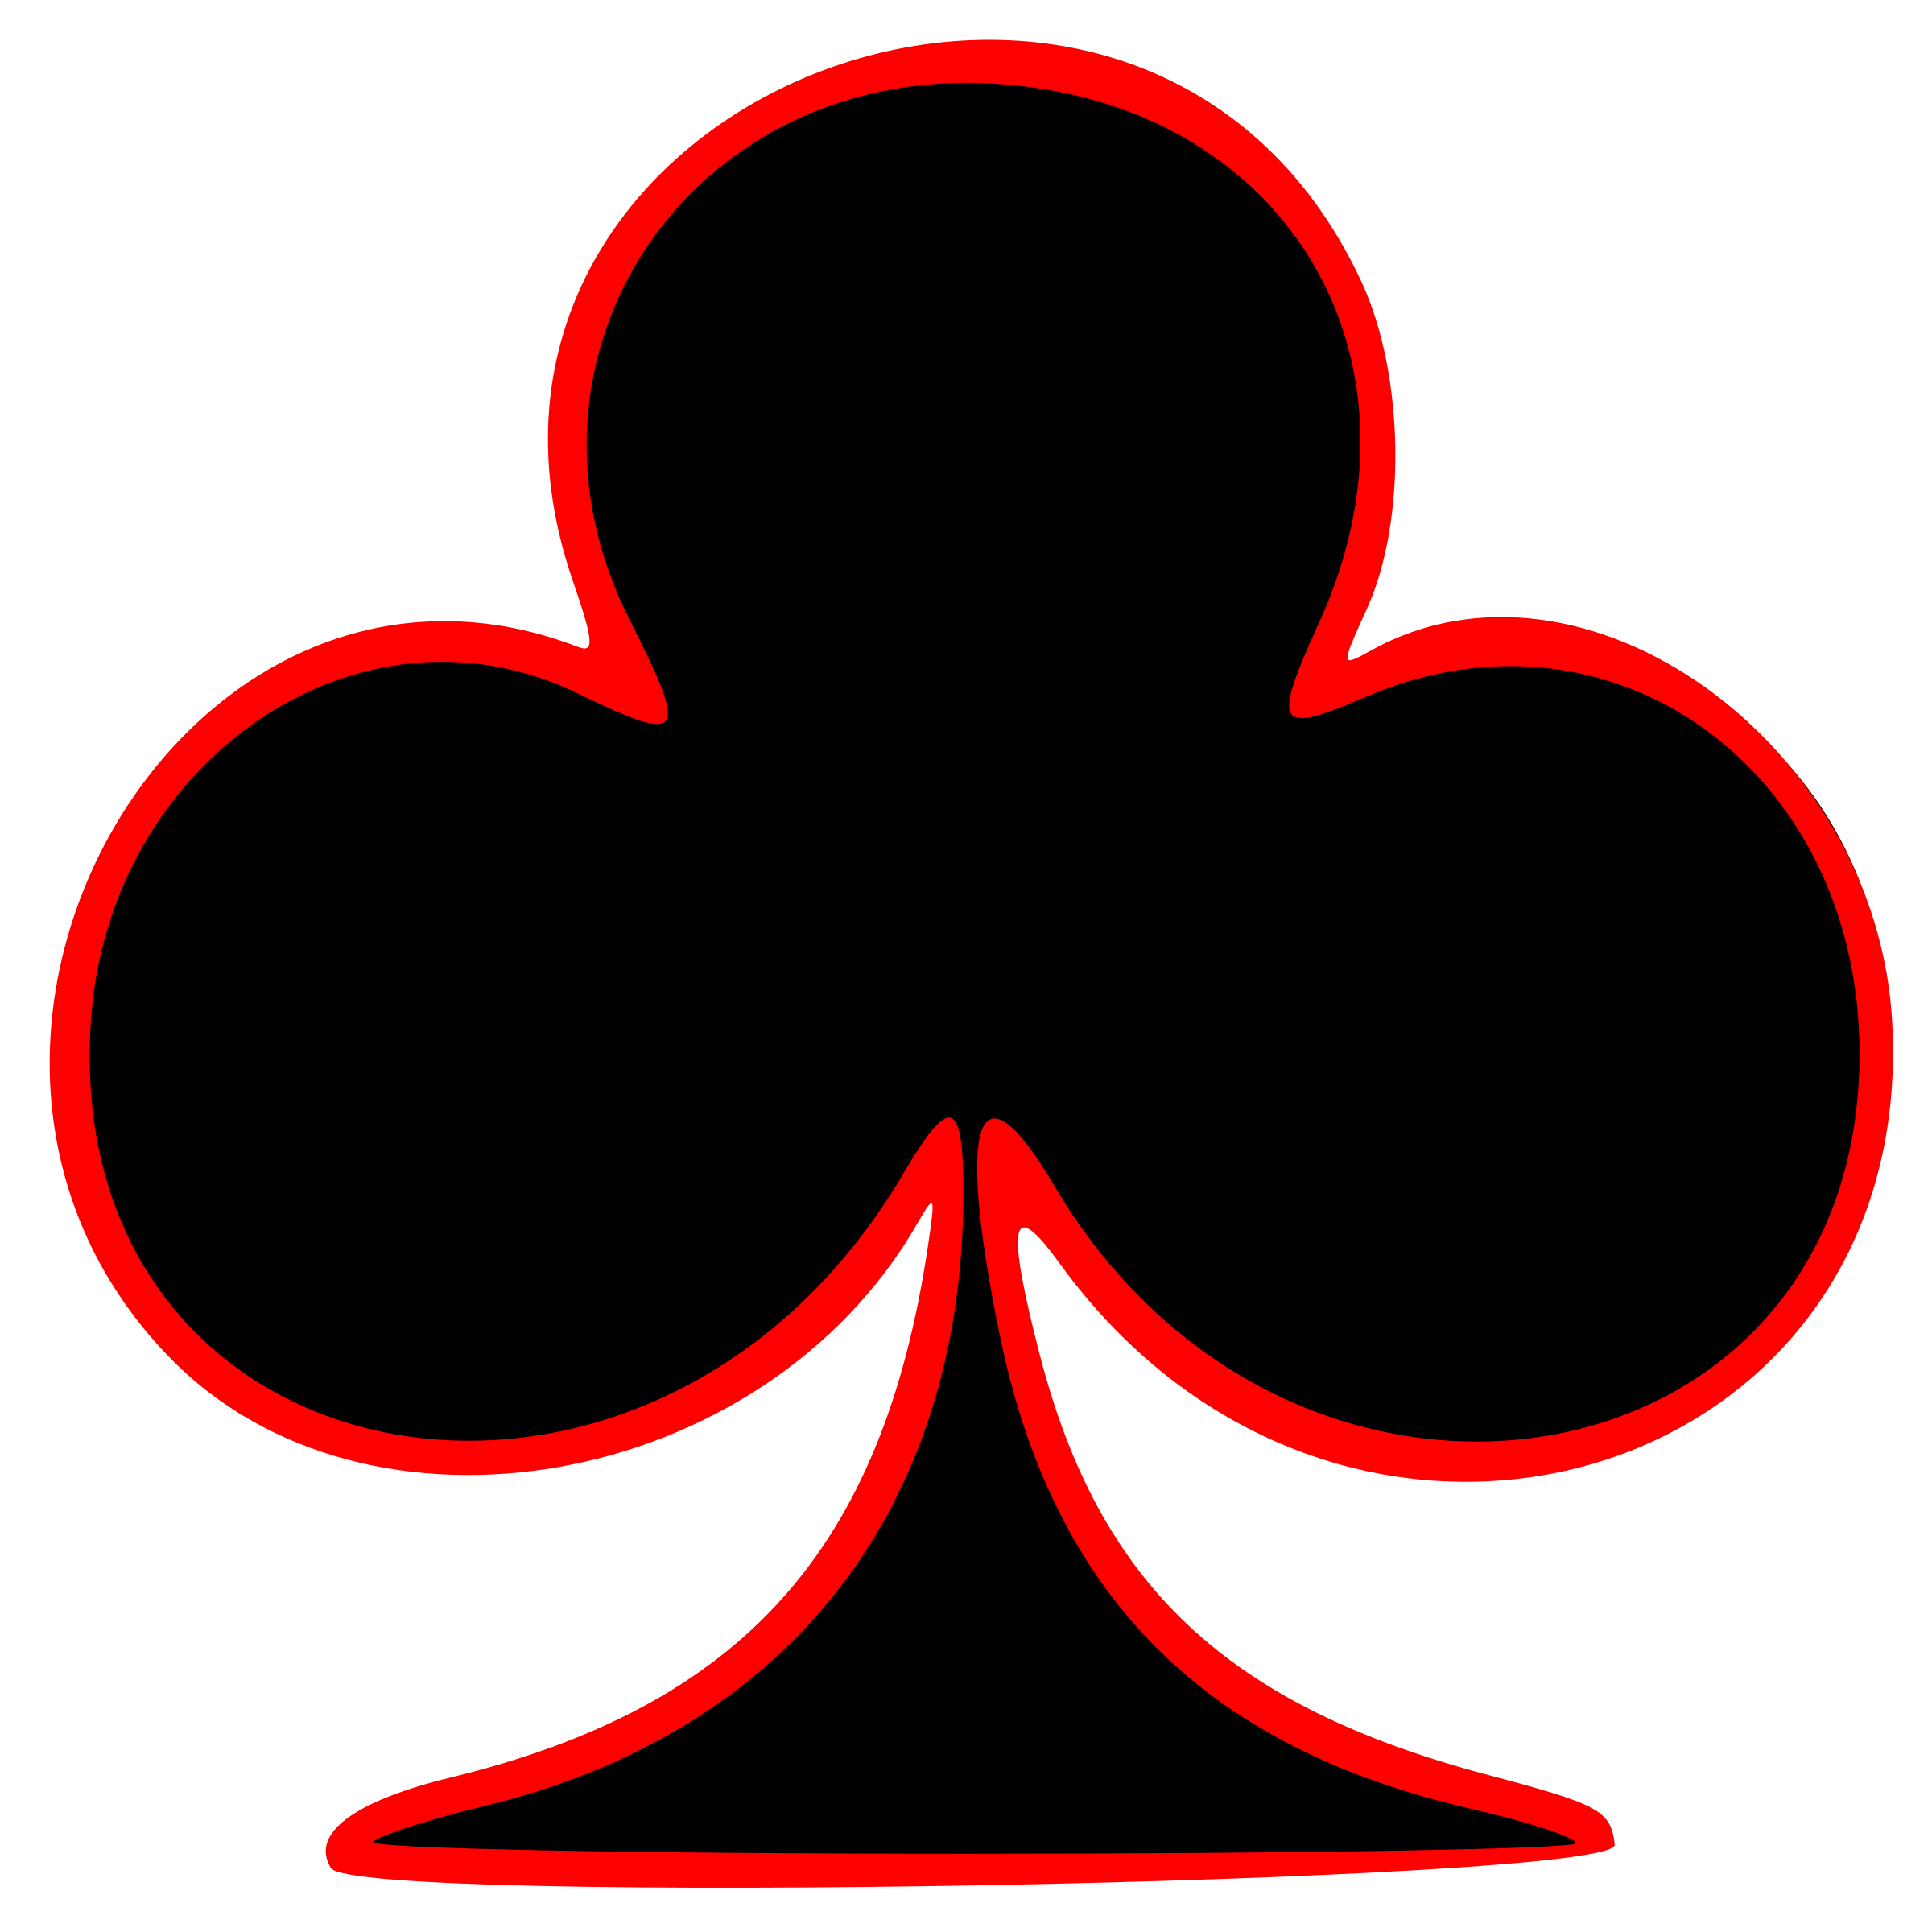 Clipart - Outlined Club Playing Card Symbol